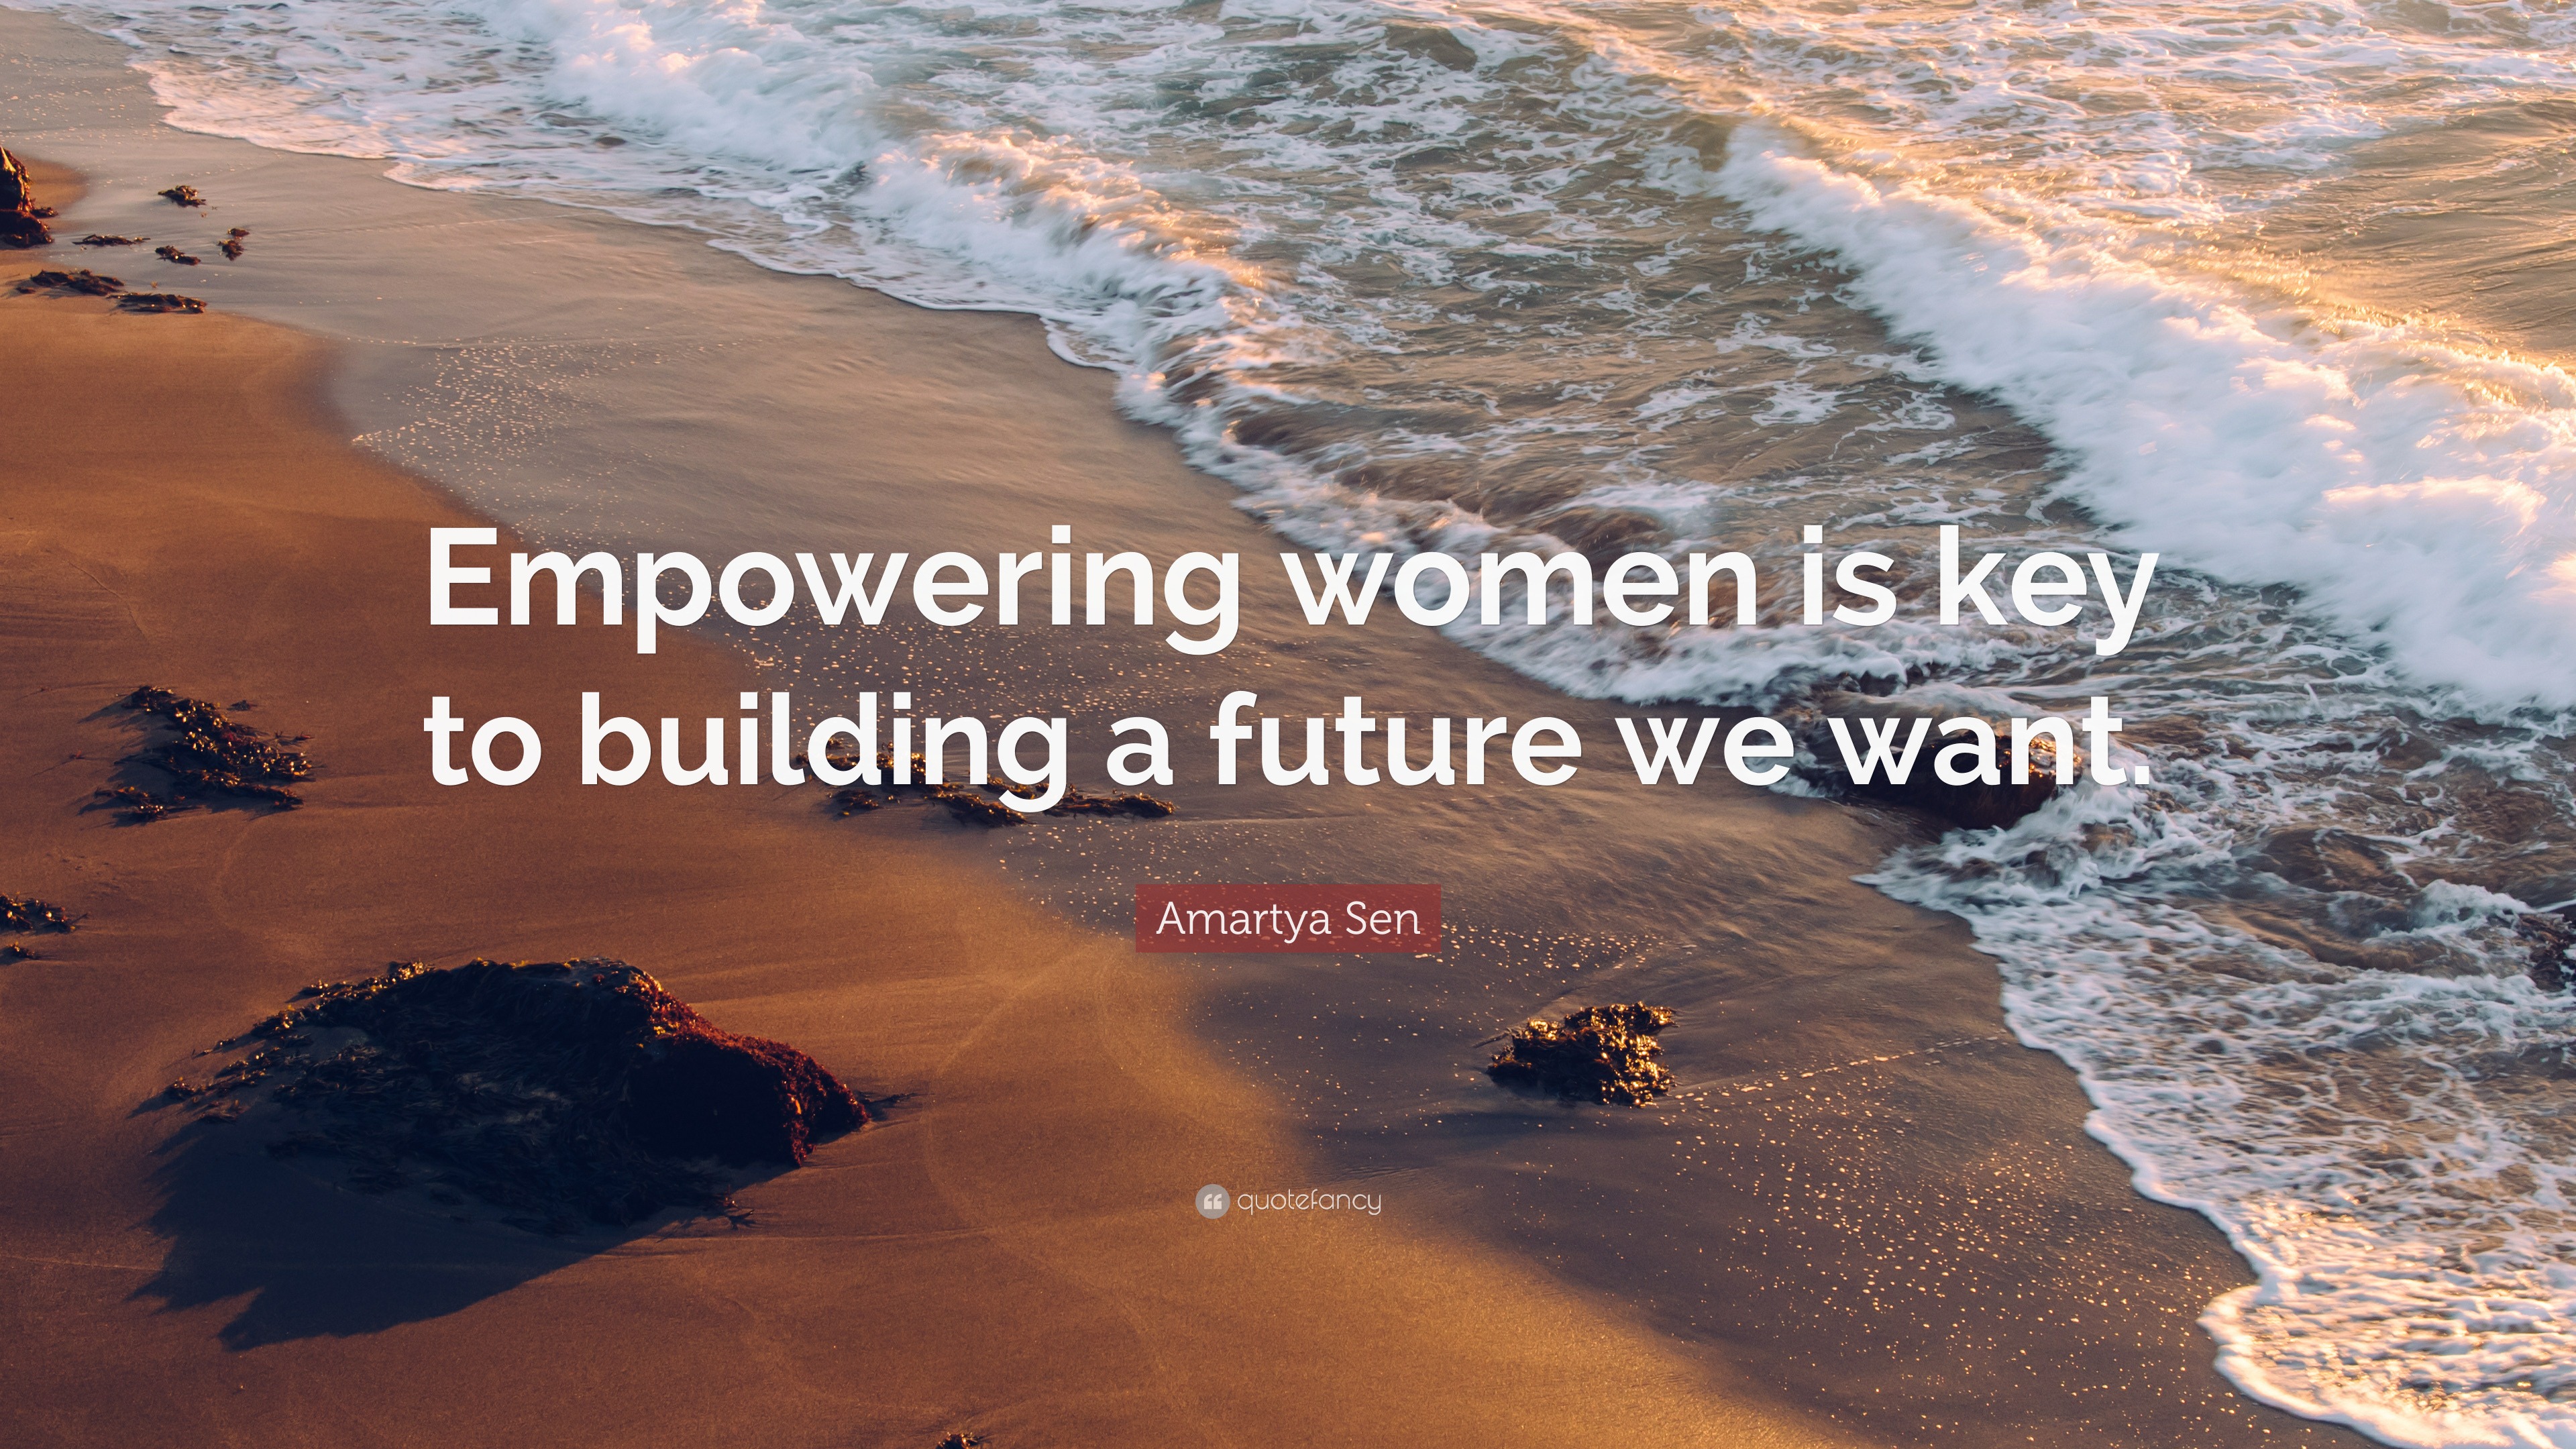 Women Empowerment Thoughts.